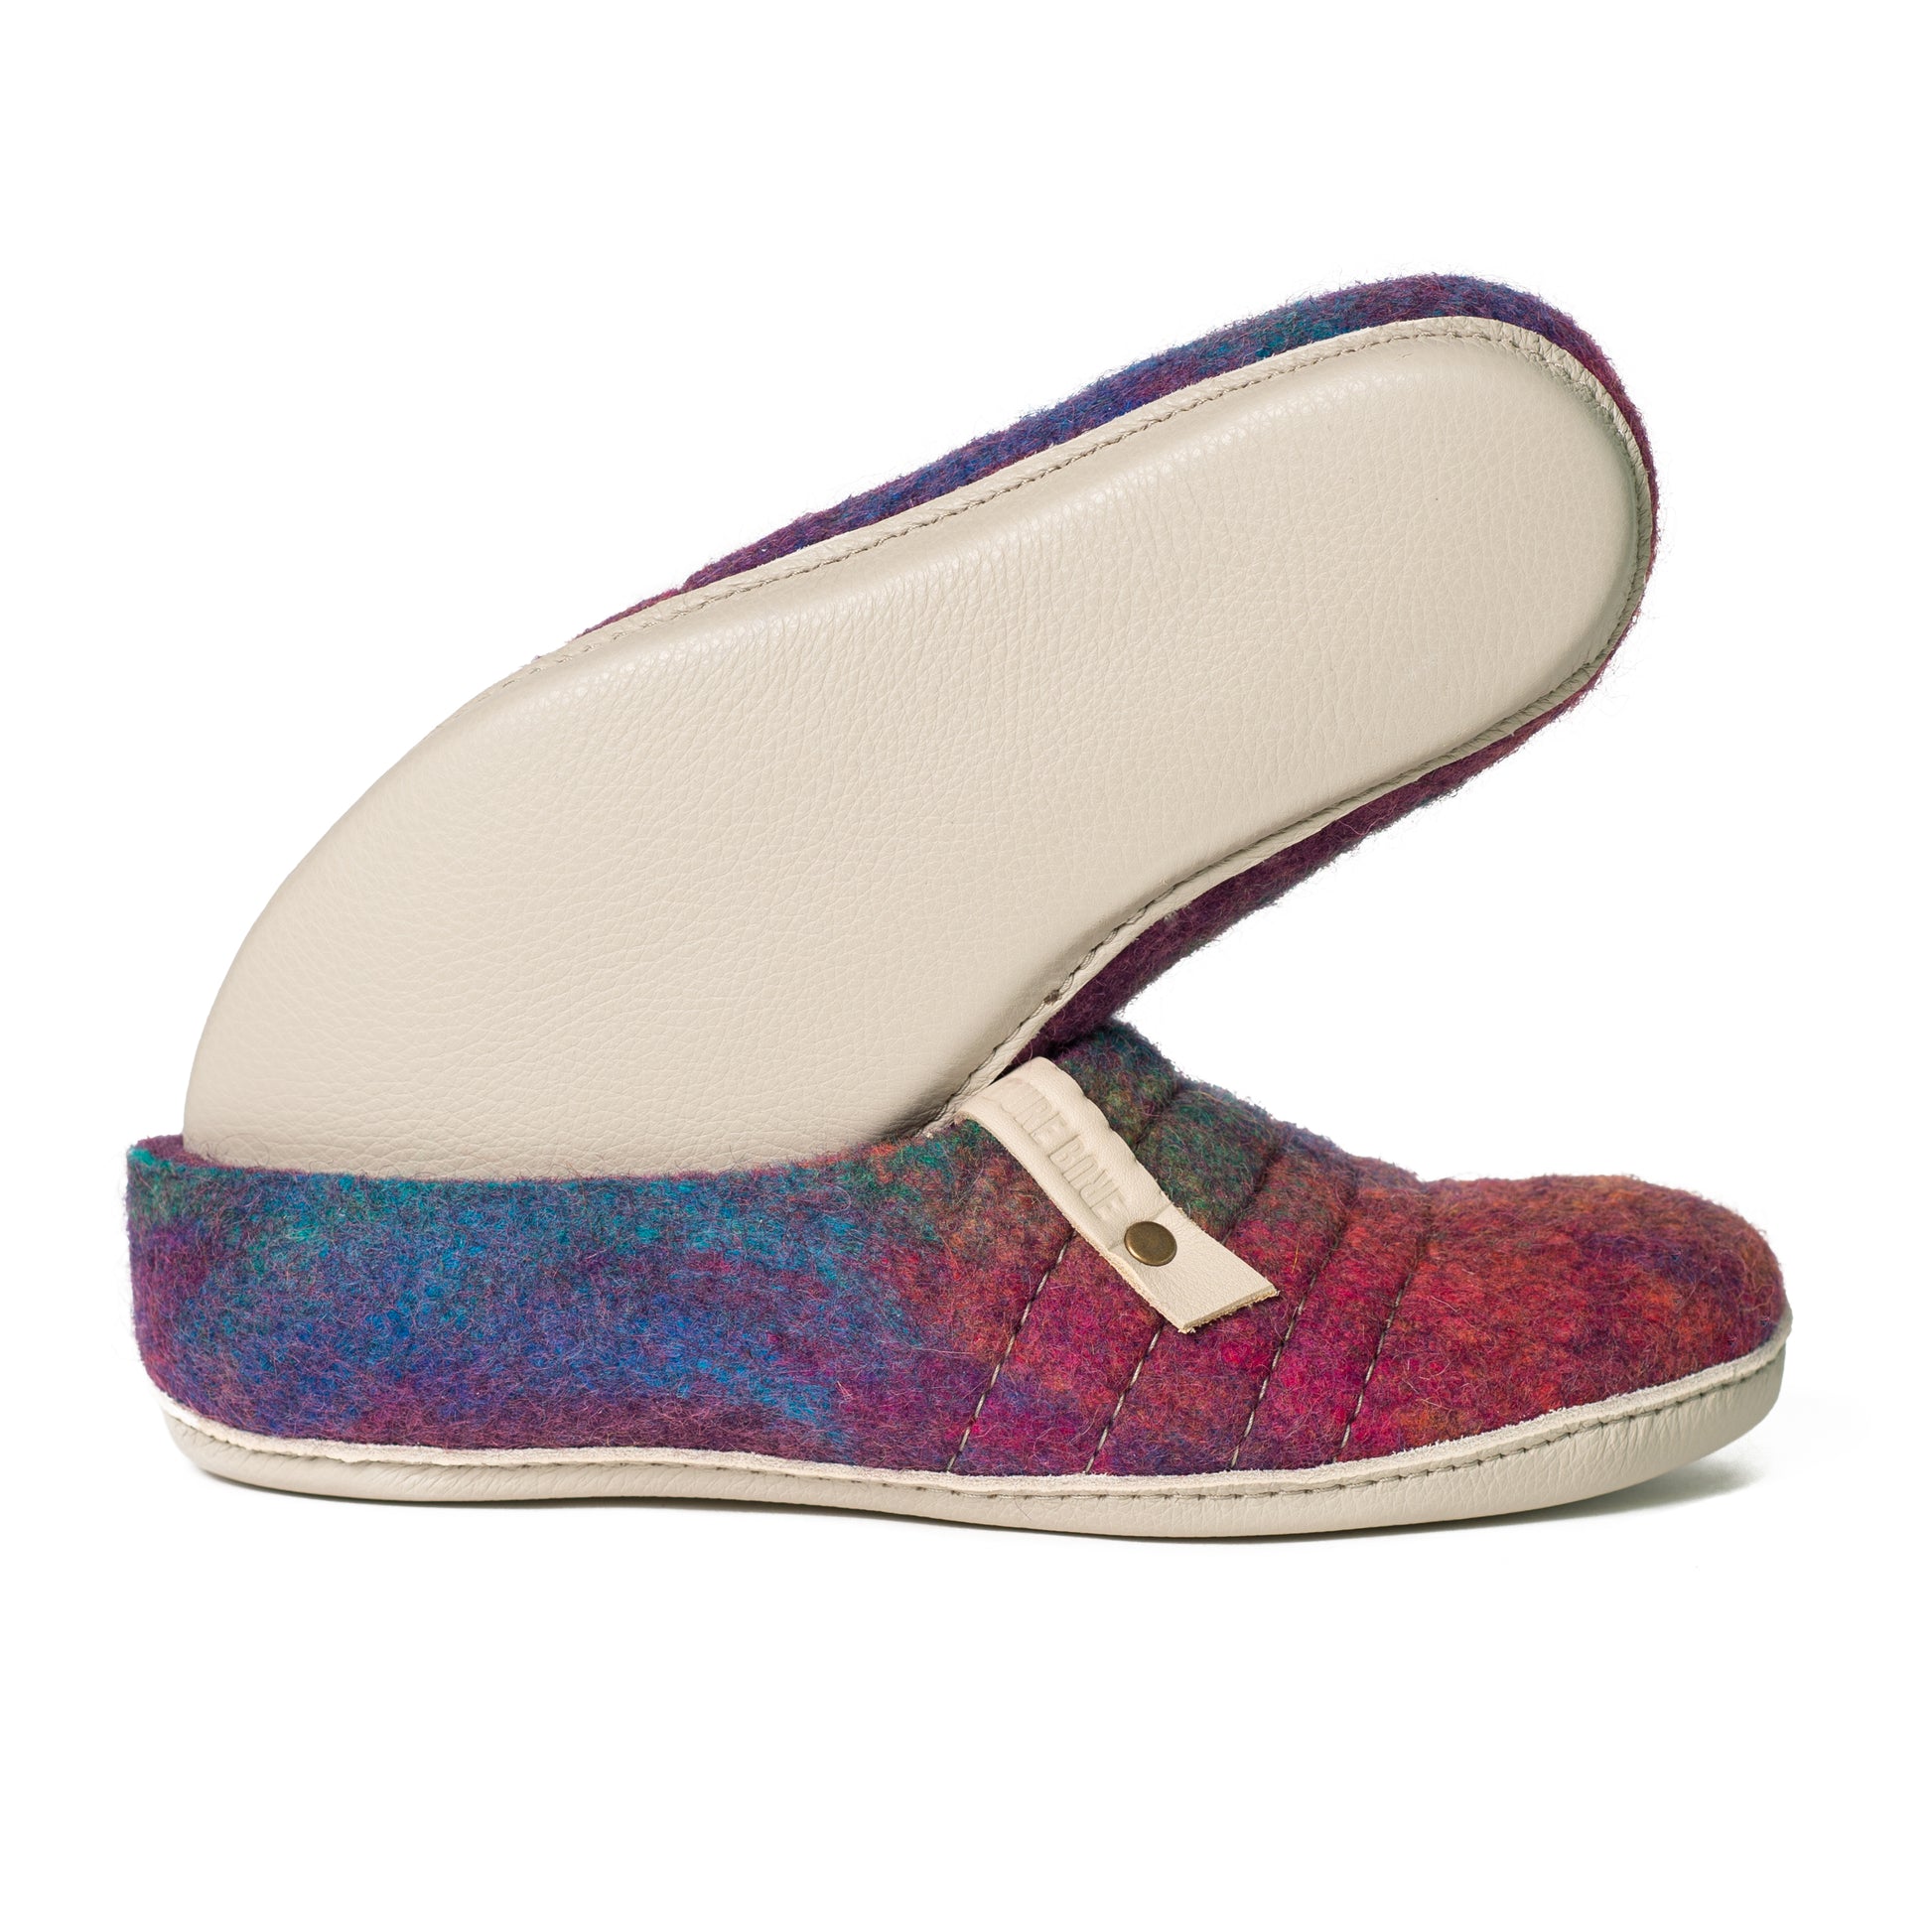 Purple Rainbow Low Cut Felted Wool Clogs for Women with White Recycled Leather Soles - Cocoon collection